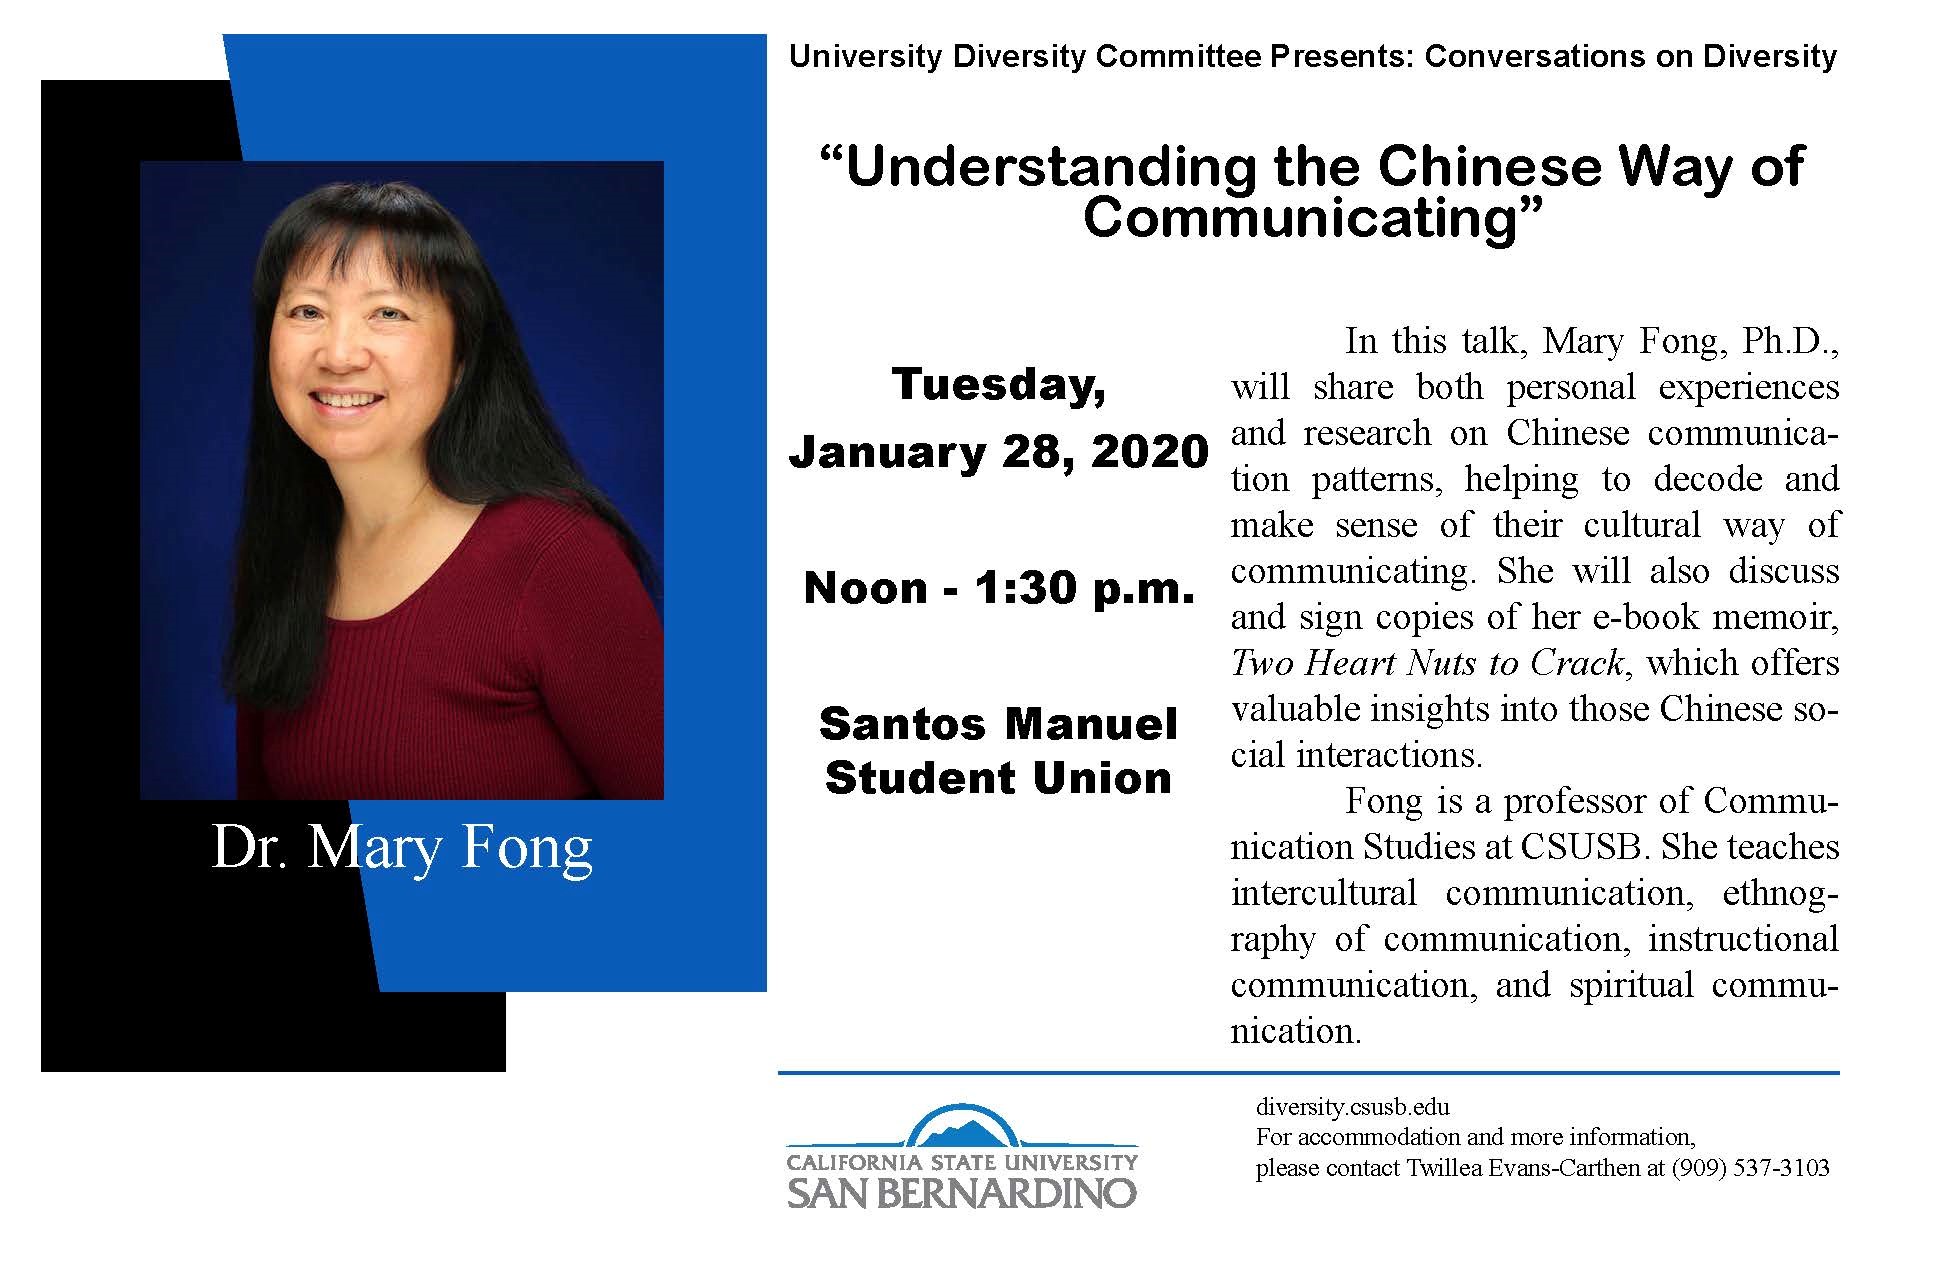 "Understanding the Chinese Way of Communicating." 